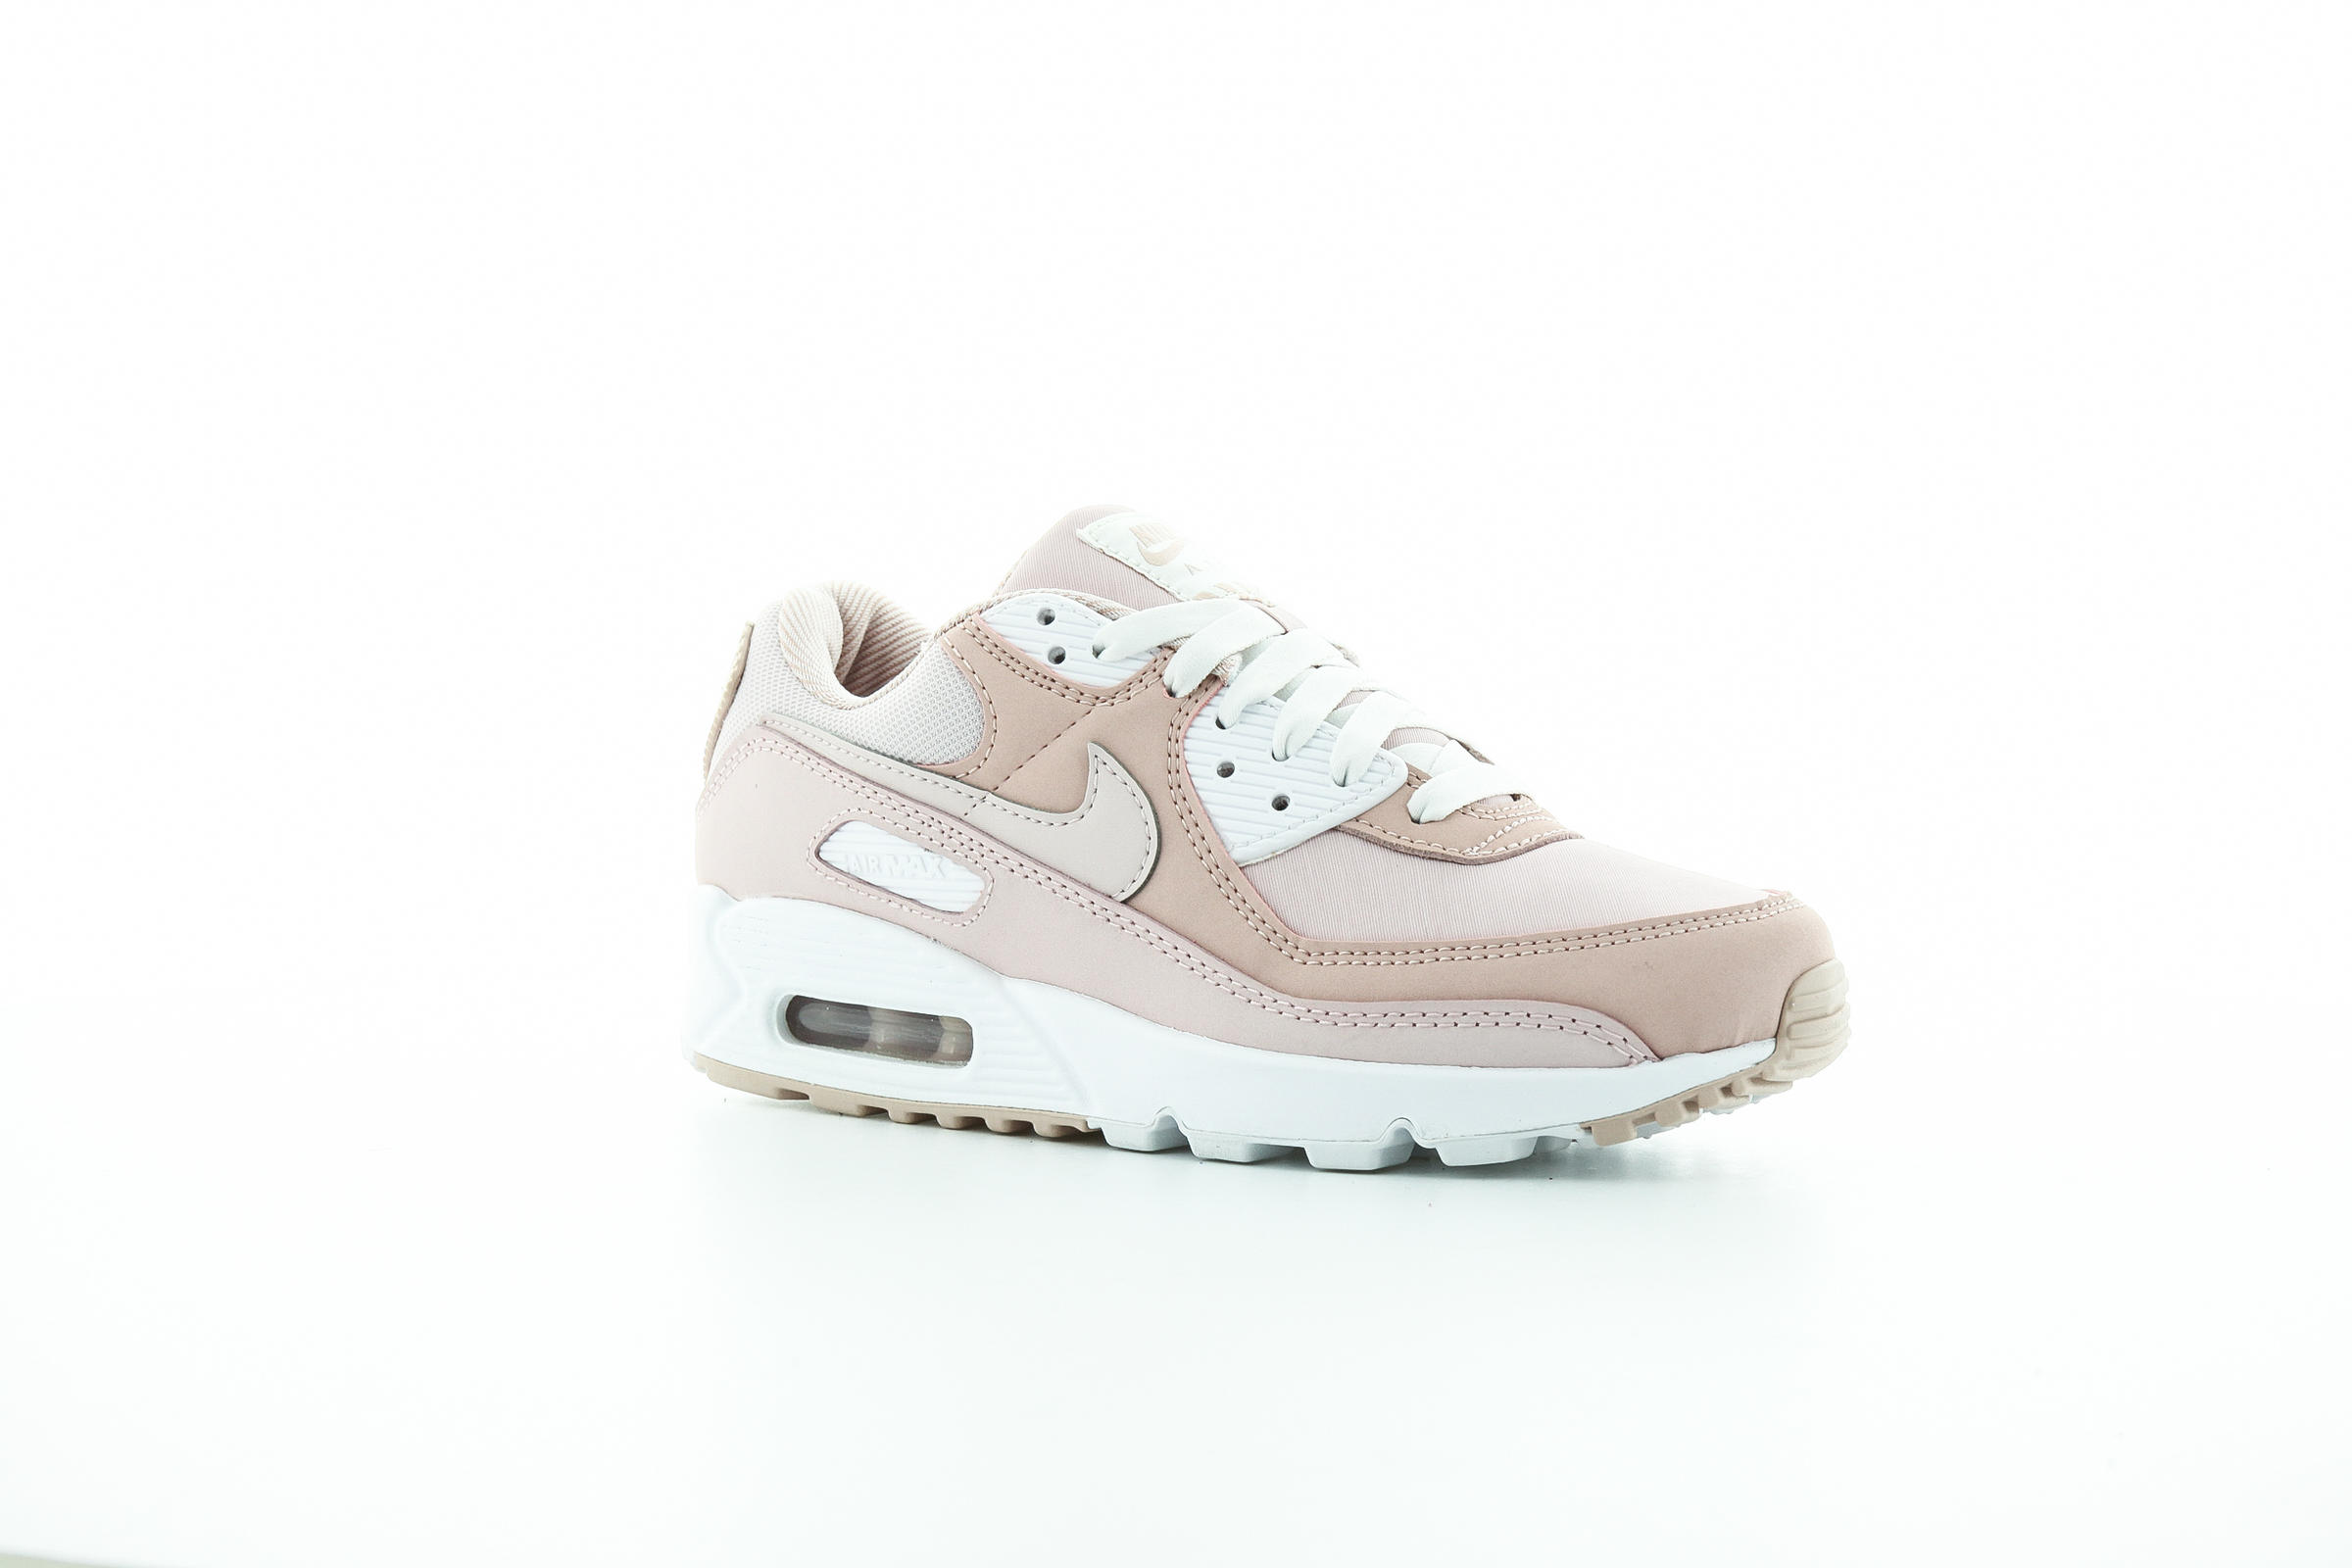 Nike WMNS AIR MAX 90 "BARELY ROSE"